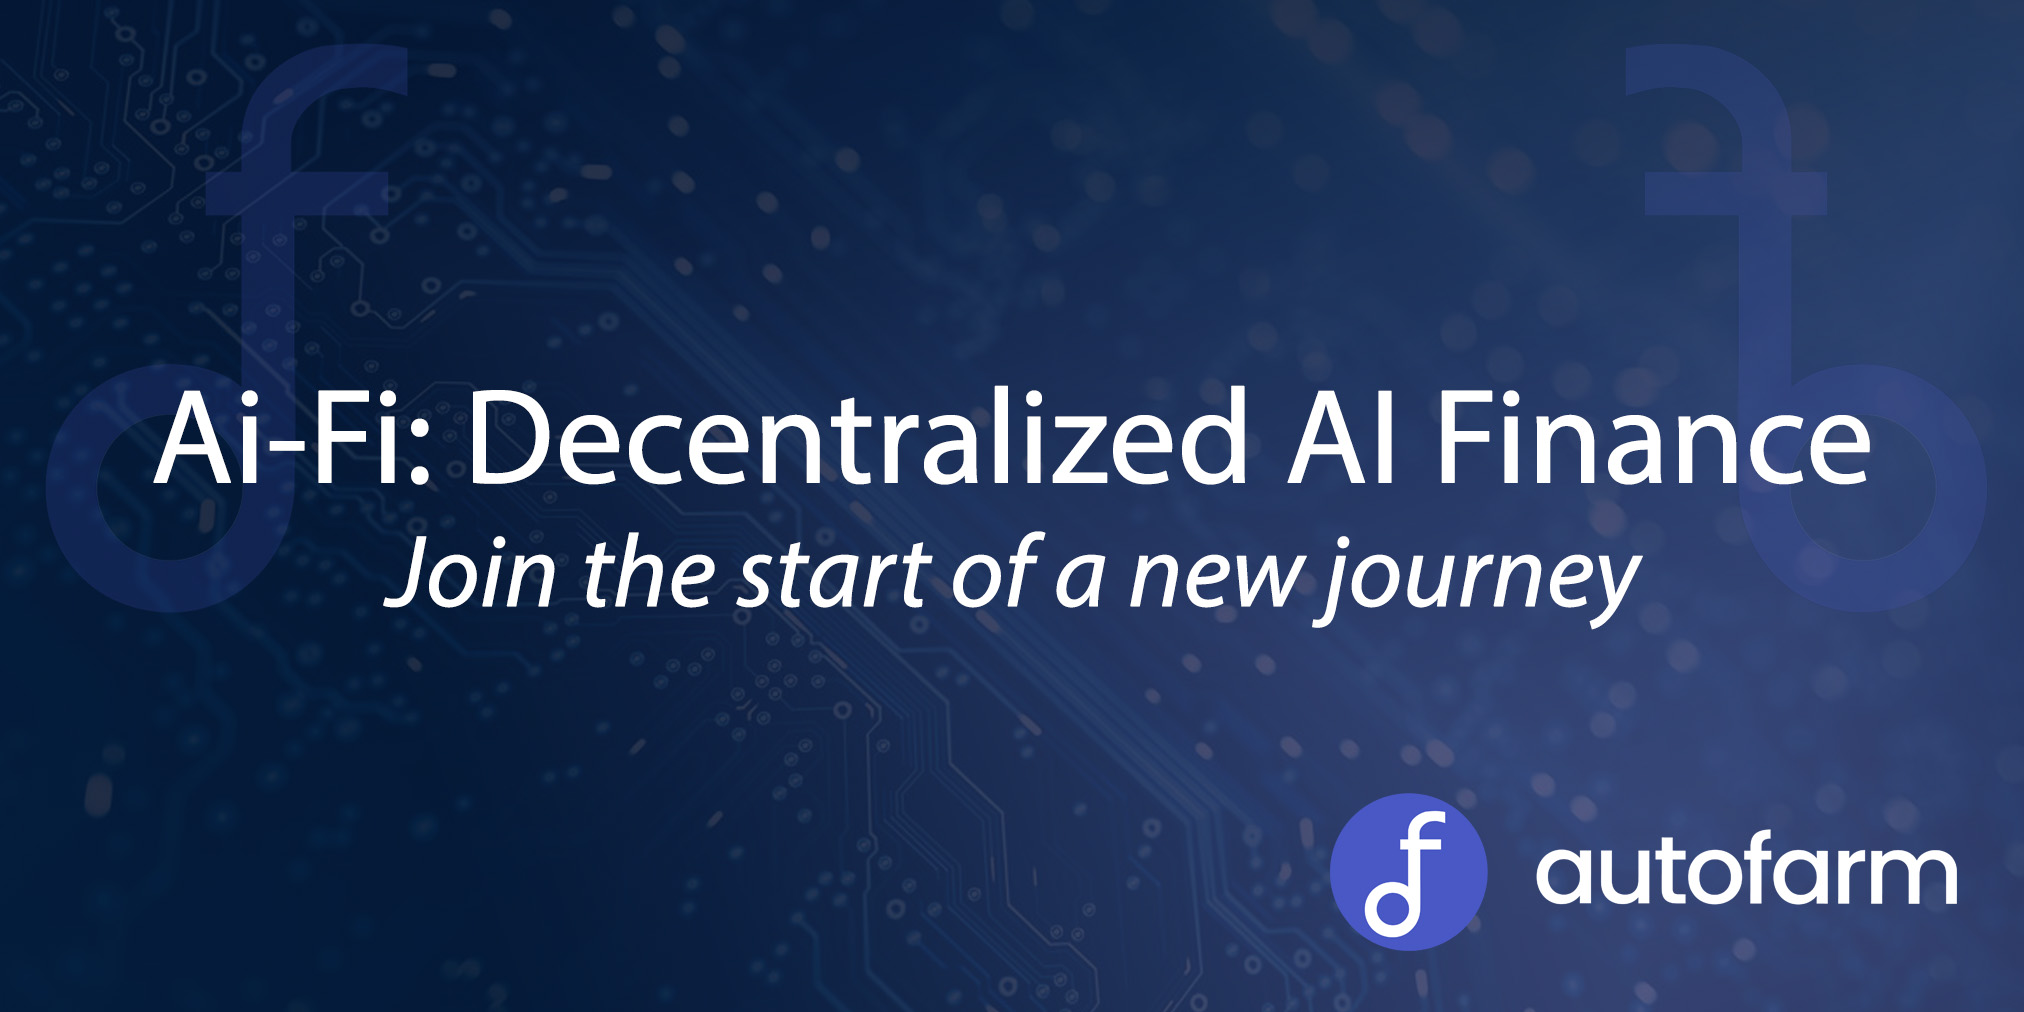 Autofarm (AUTO) is Securing $5M Investment to Research & Develop Artificial Intelligence on DeFi: AI-Fi